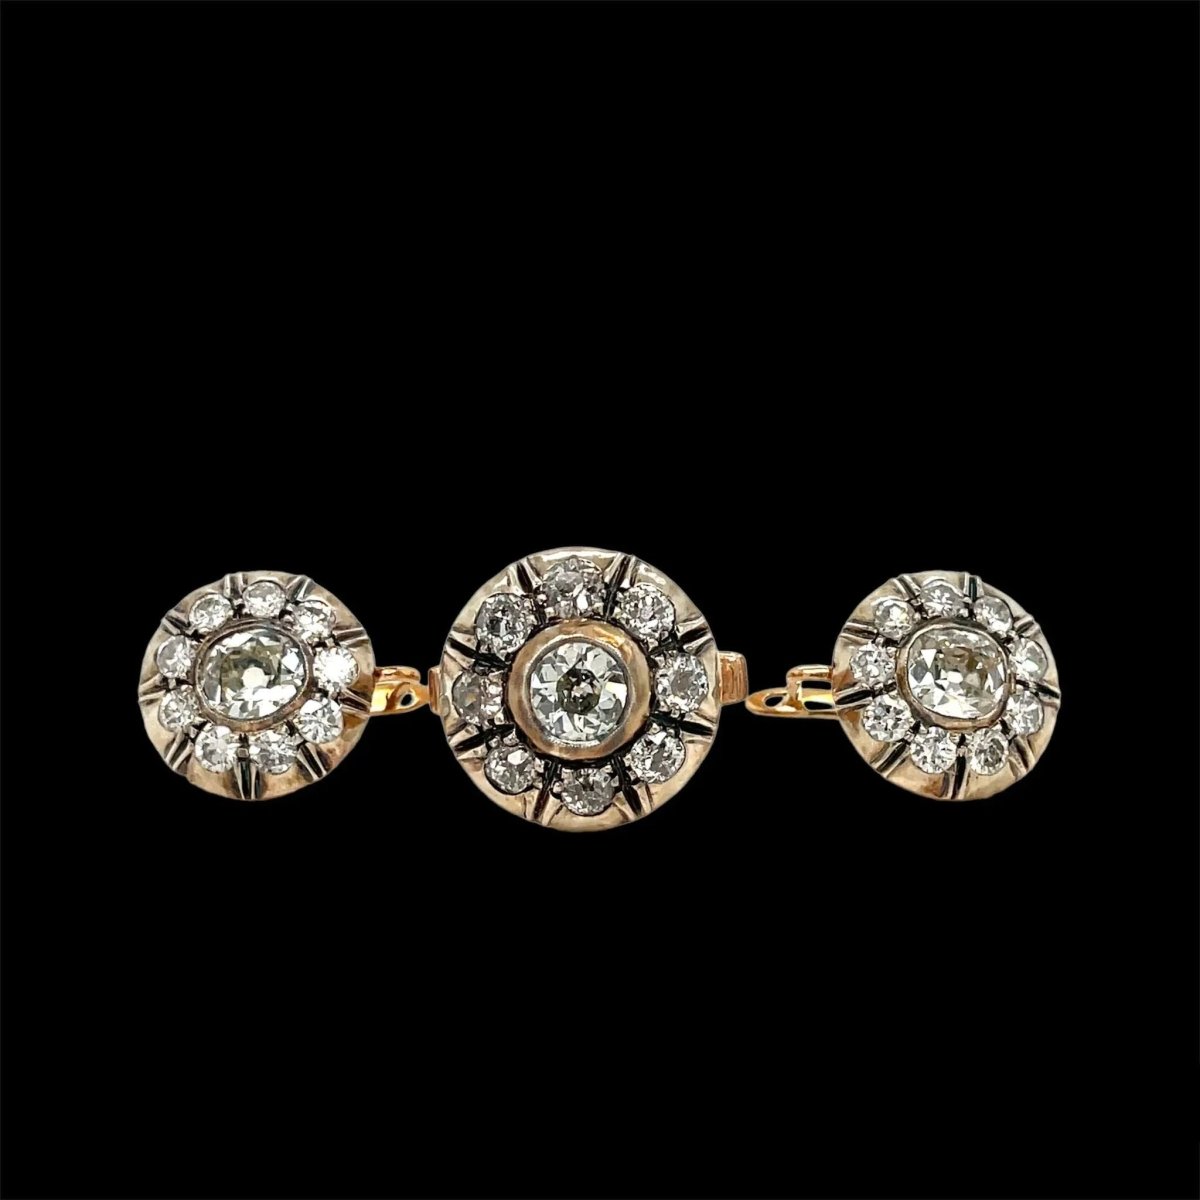 Victorian Diamond Gold and Silver Ring and Earrings Set - Castafiore